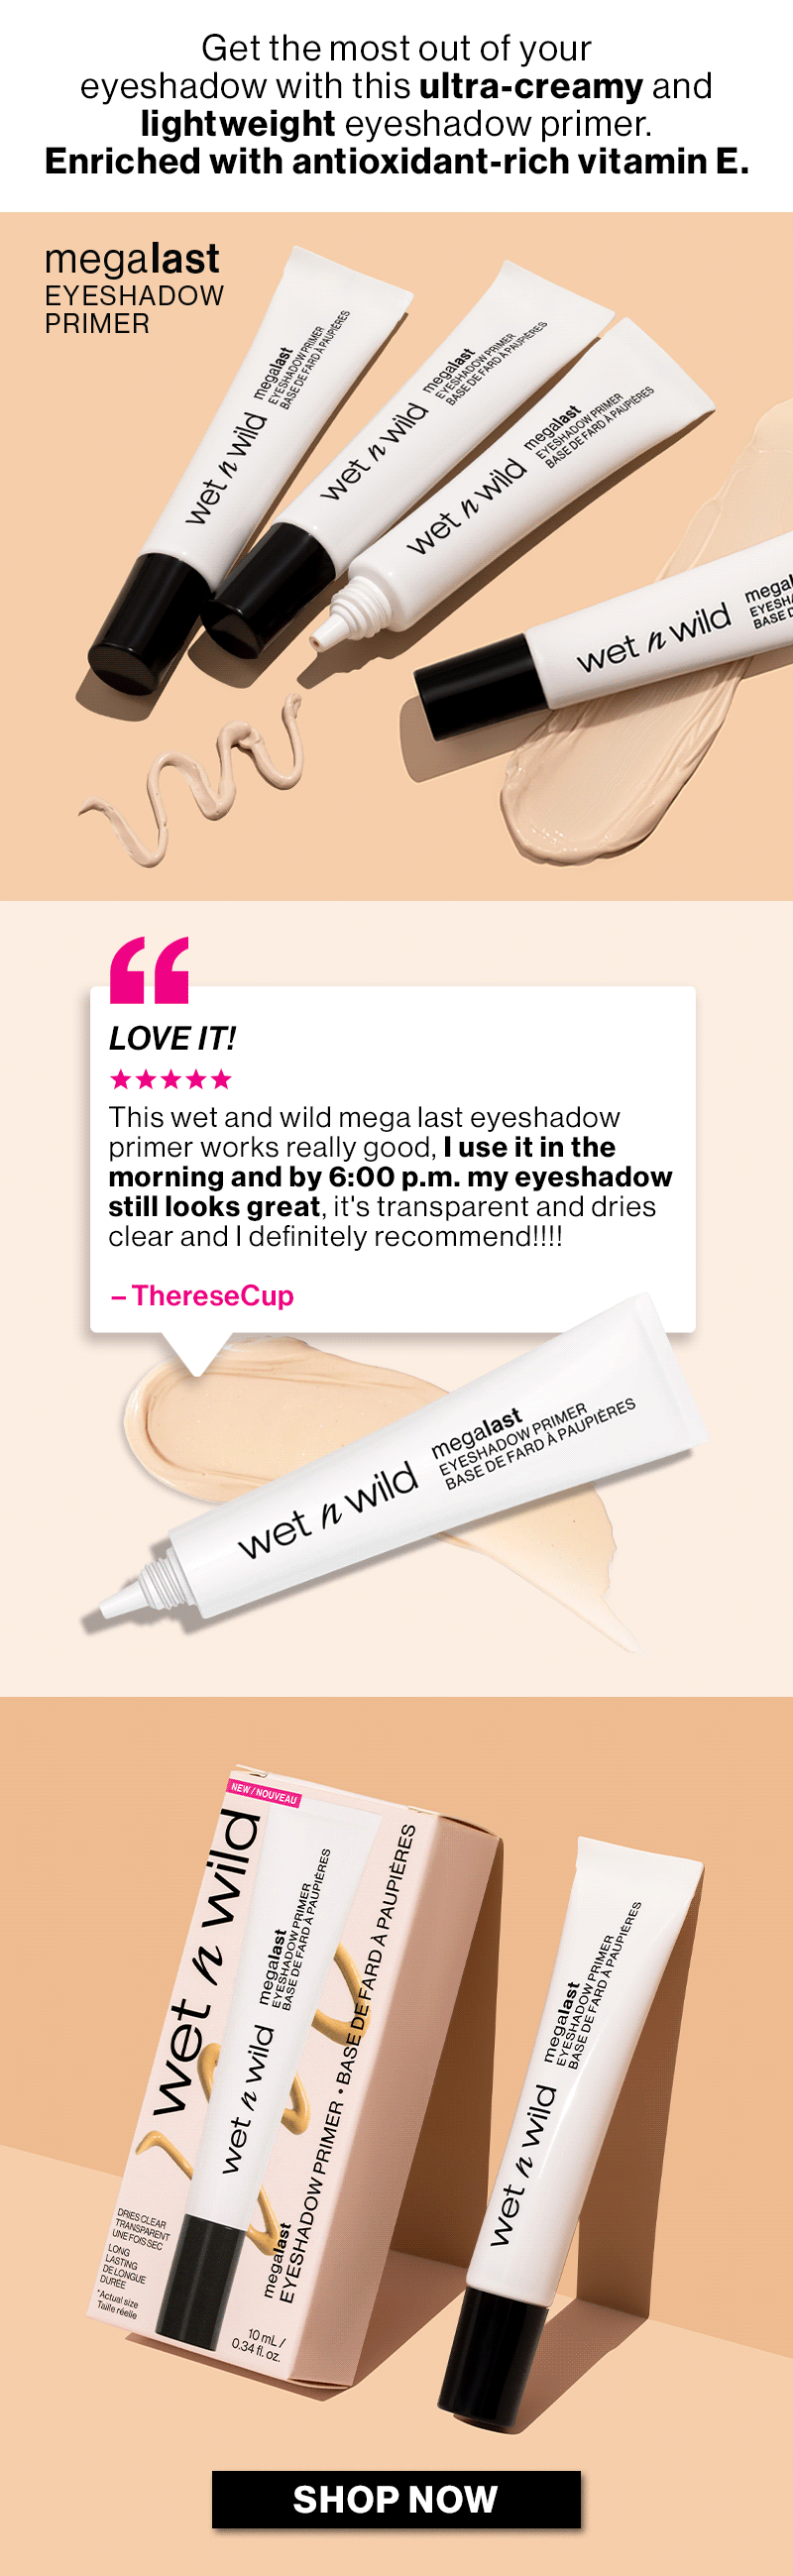 Get the most out of your eyeshadow with this ultra-creamy and lightweight eyeshadow primer. || Love it This wet and wild mega last eyeshadow primer works really good, I use it in the morning and by 6:00 p.m. my eyeshadow still looks great, it's transparent and dries clear and I definitely recommend!!!! -ThereseCup | shop now